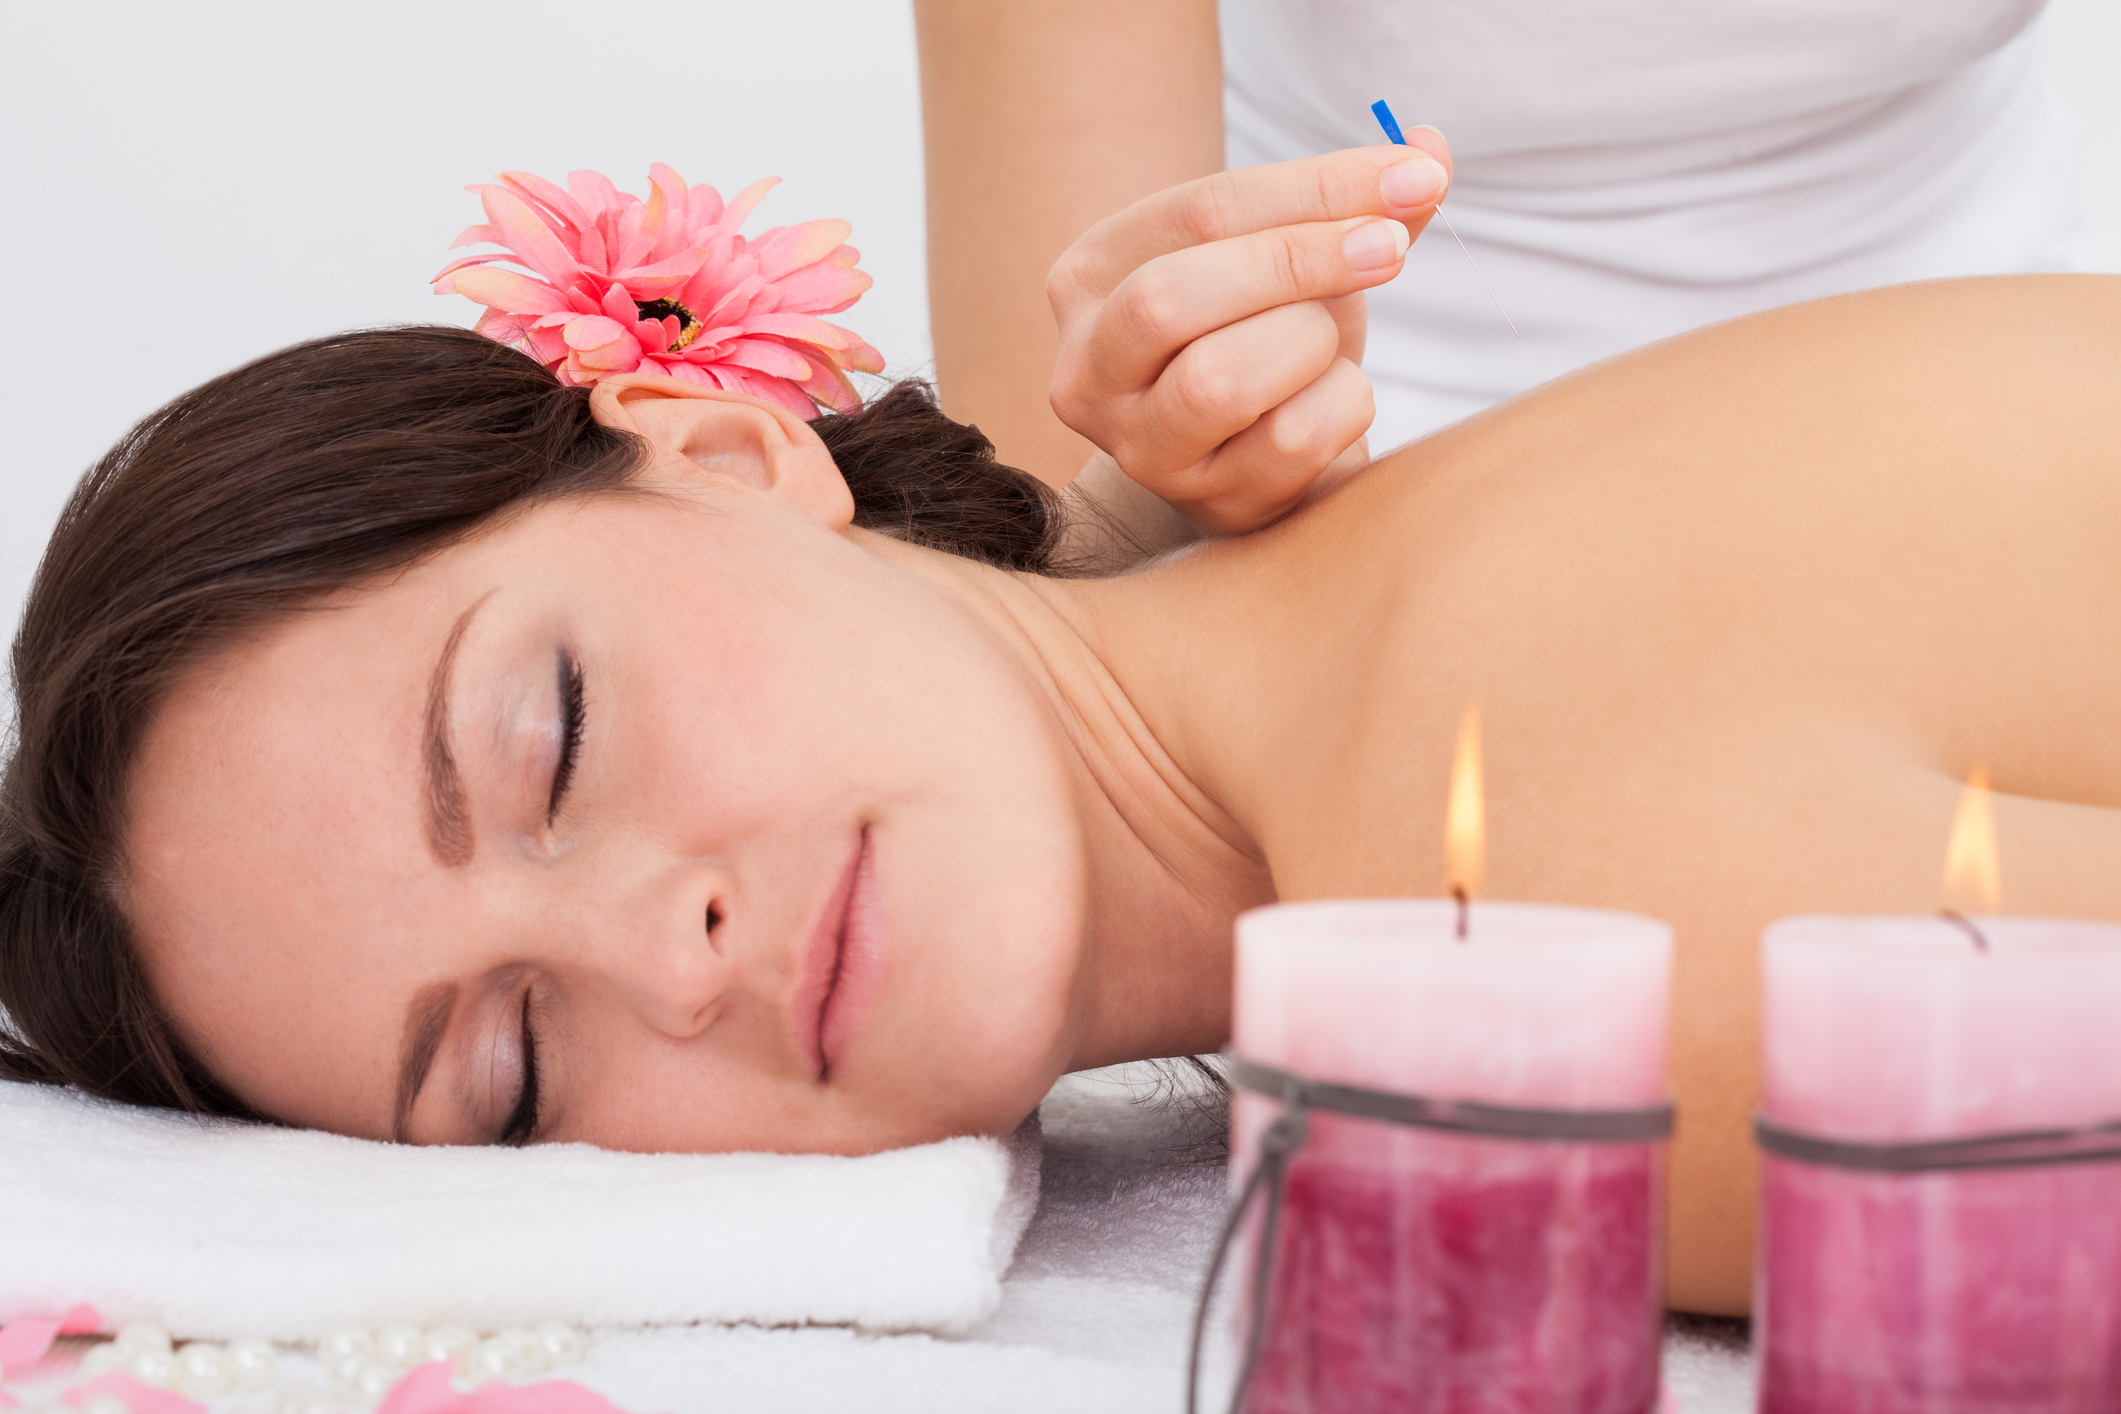 woman receiving acupuncture therapy while laying on a bed next to pink candles